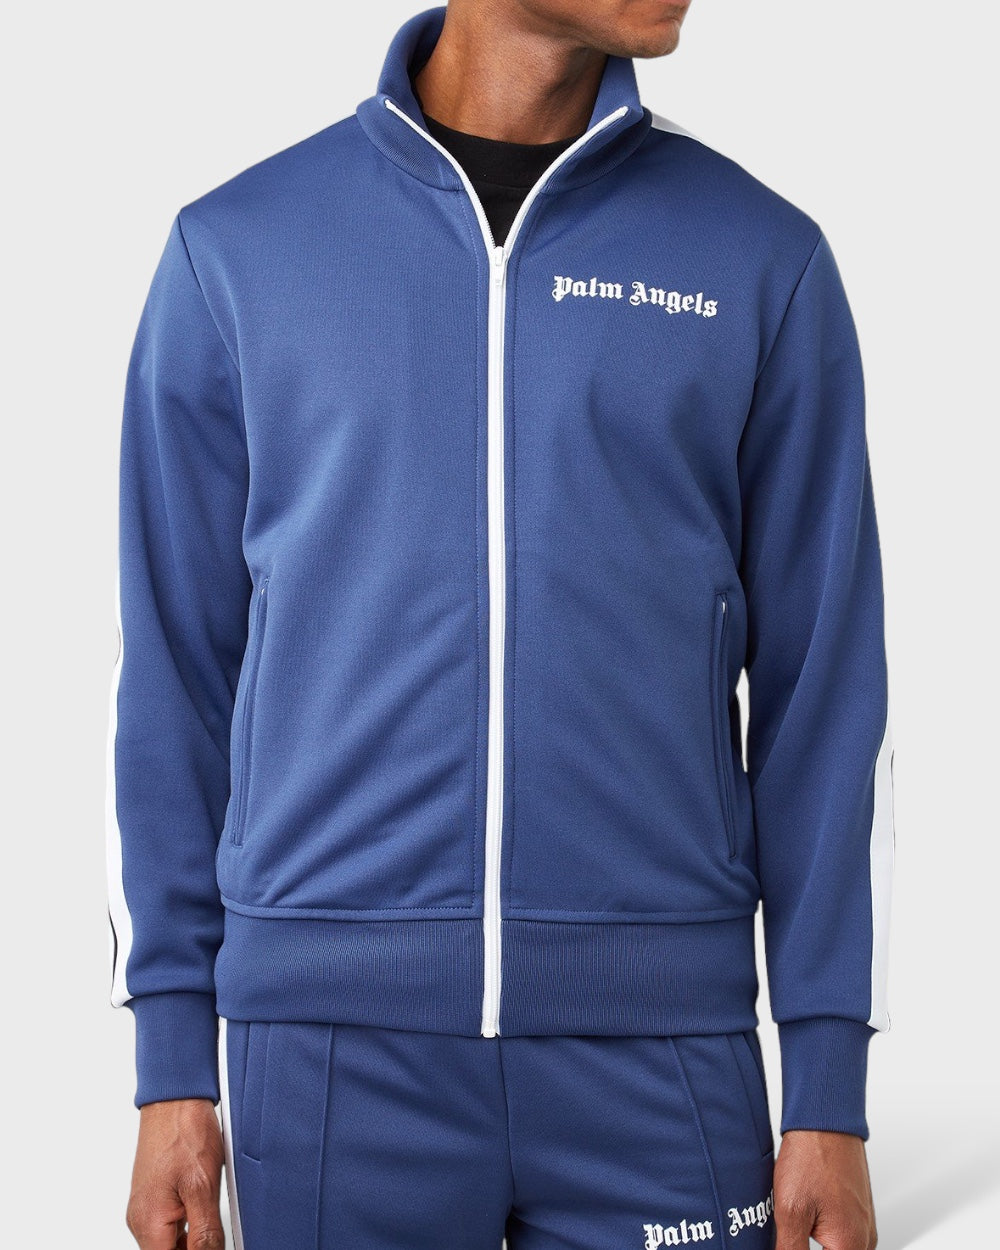 Palm Angels Blue Polyester Sweater